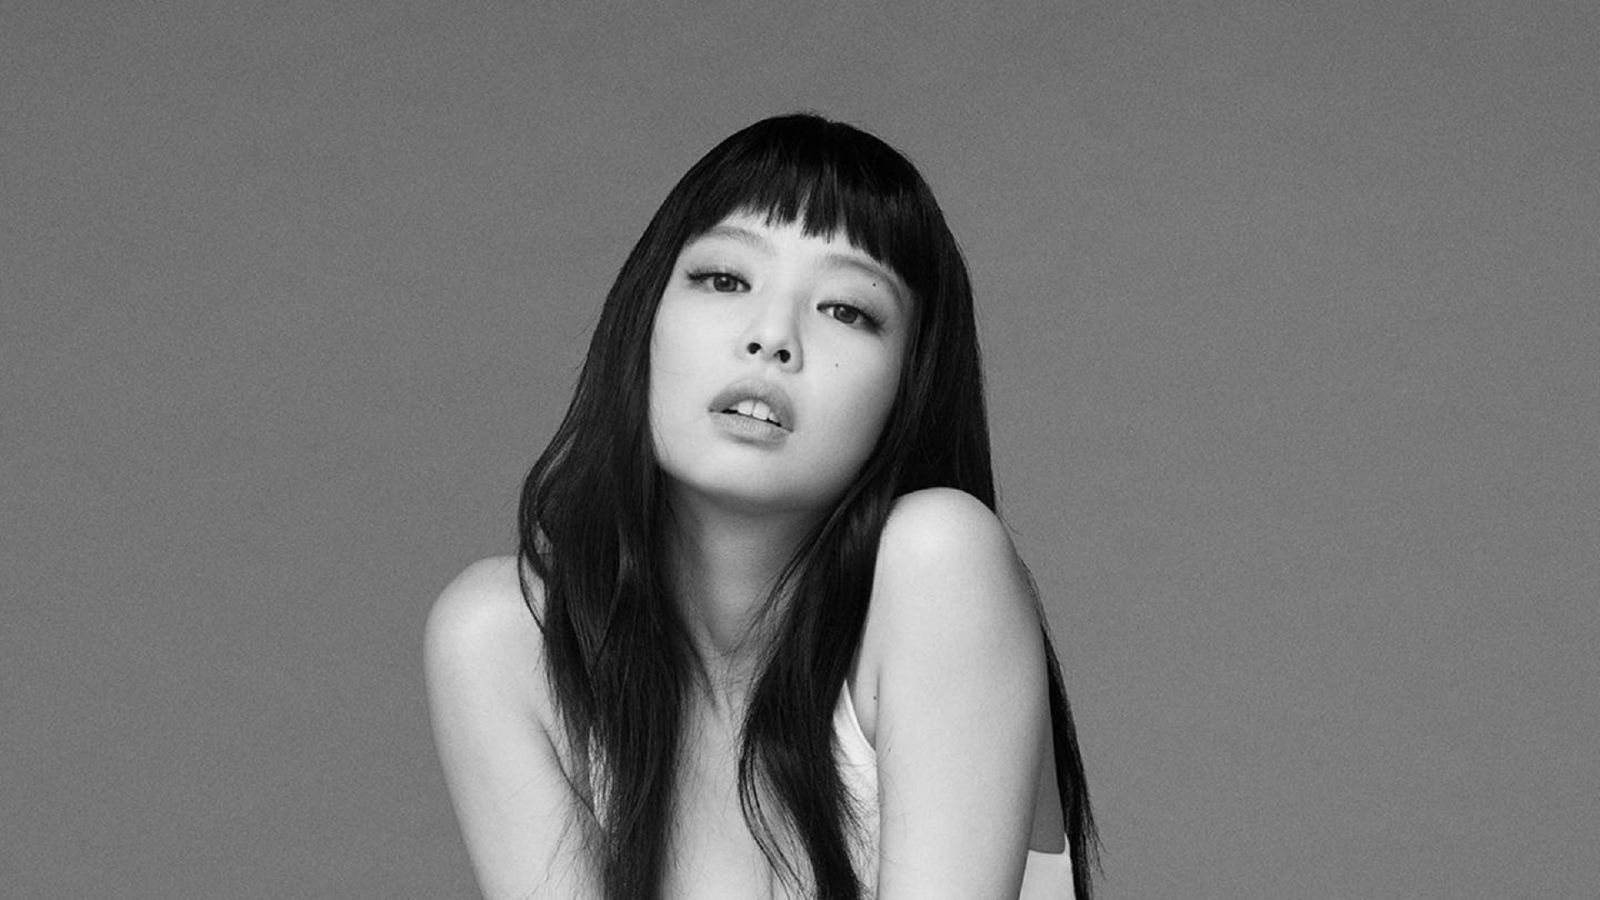 Calvin Klein and Jennie of BLACKPINK are releasing a capsule collection